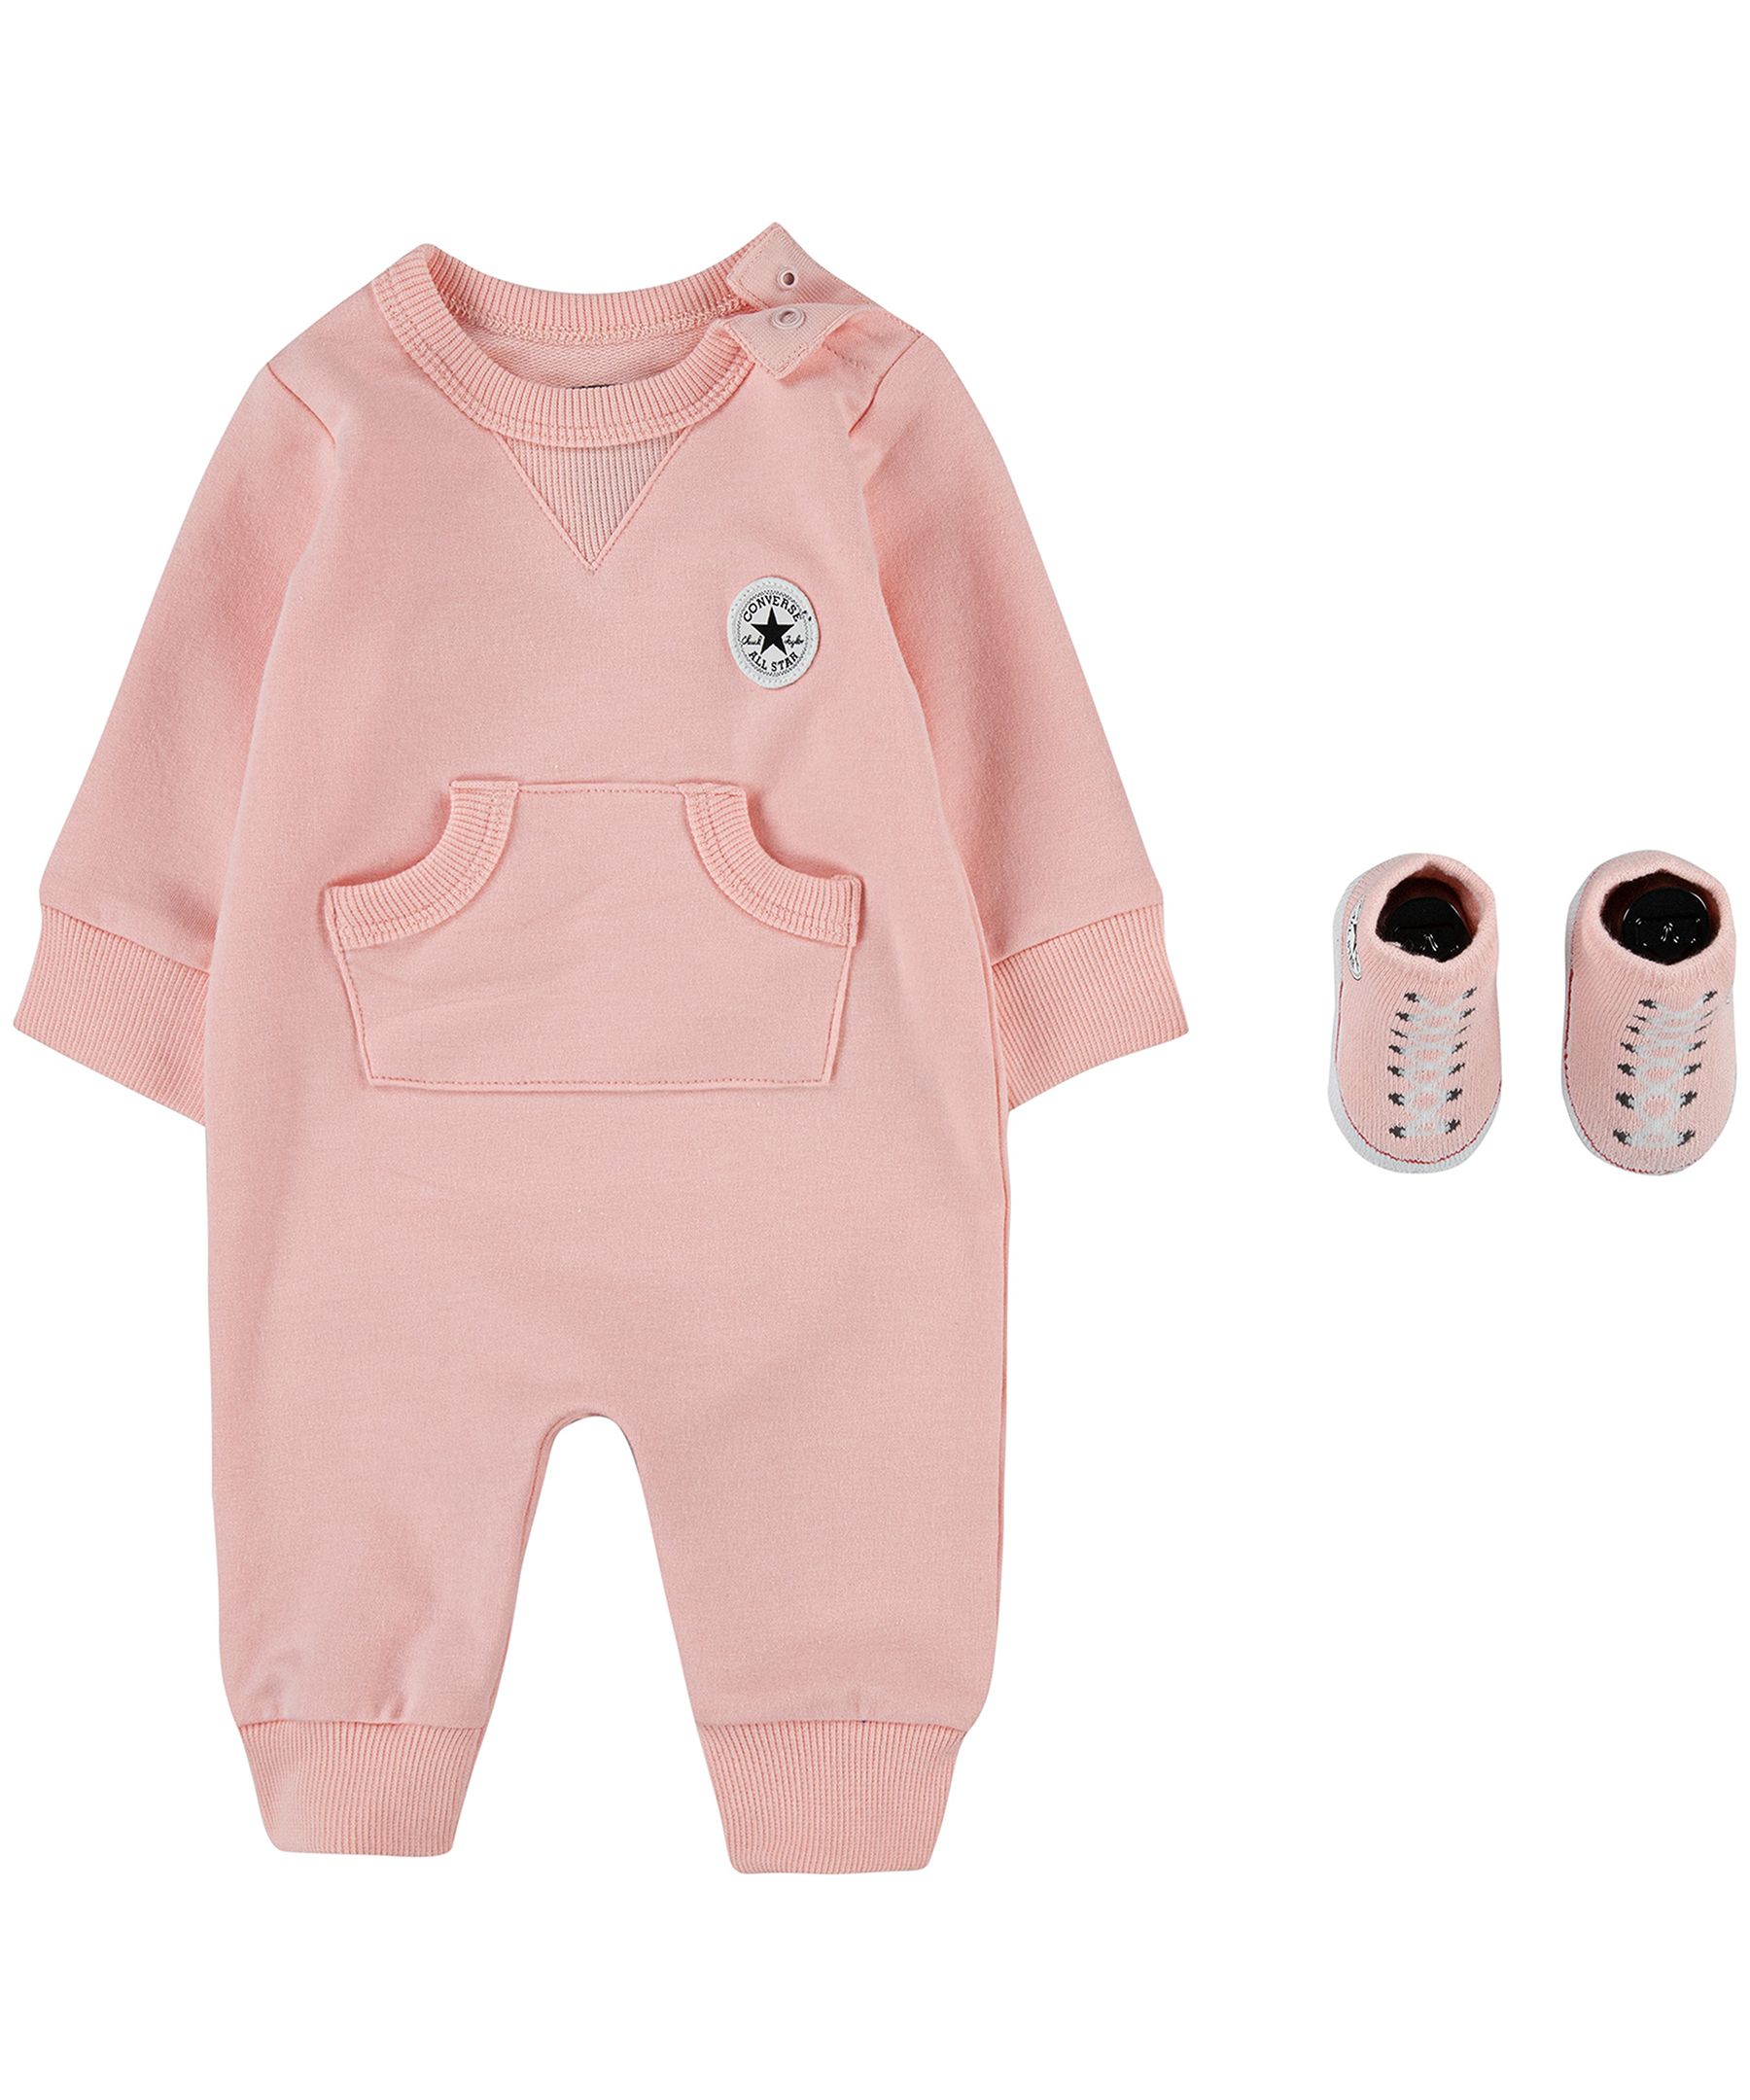 Converse Baby Coverall with Sock Bootie Set | Marks